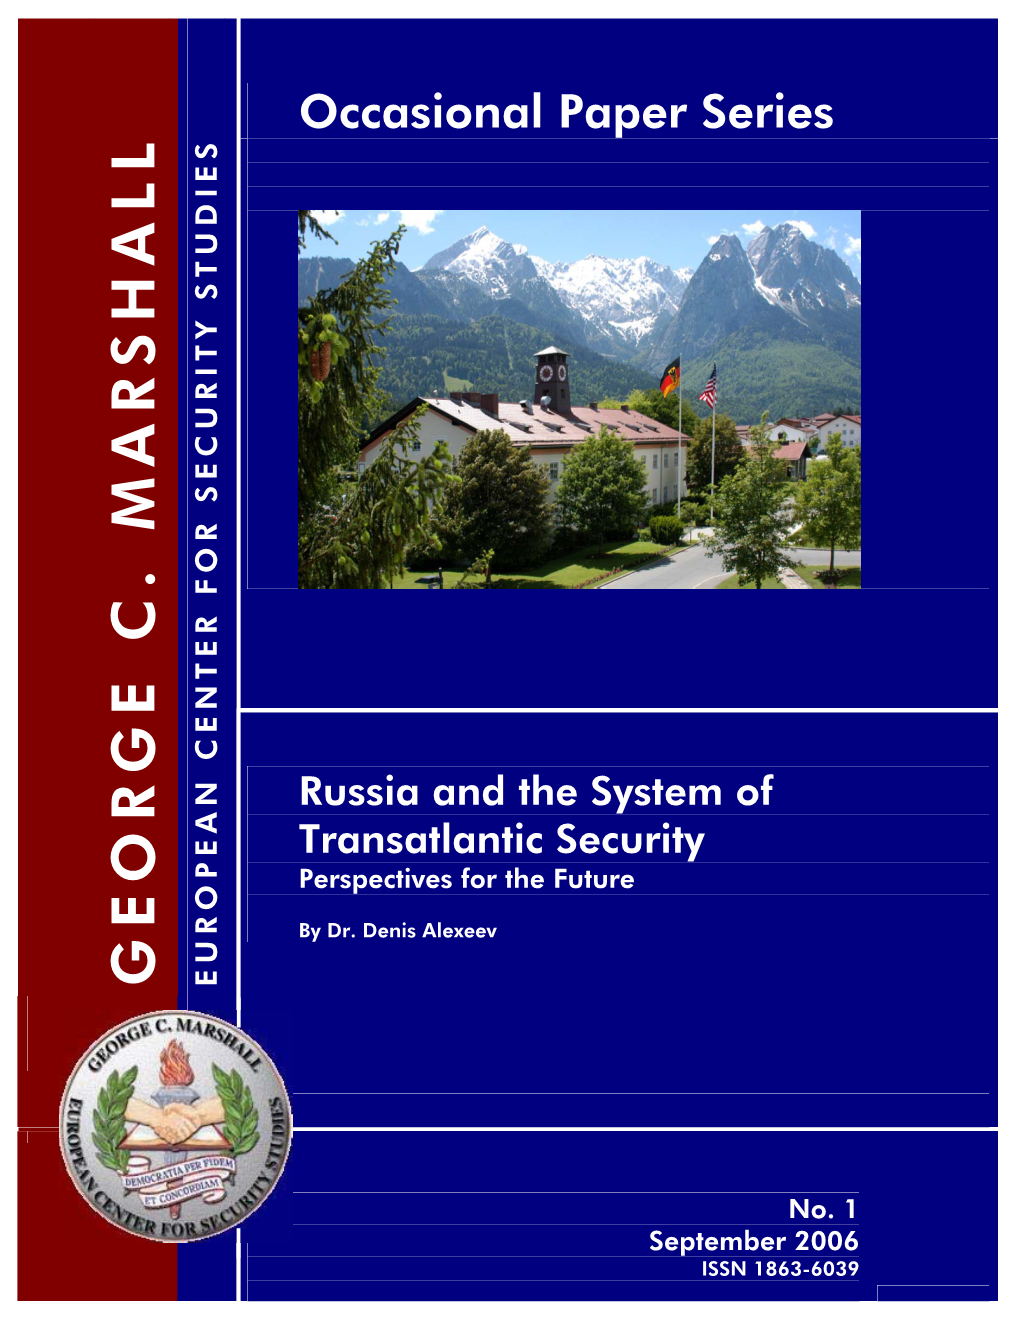 Russia and the System of Transatlantic Security Perspectives for the Future